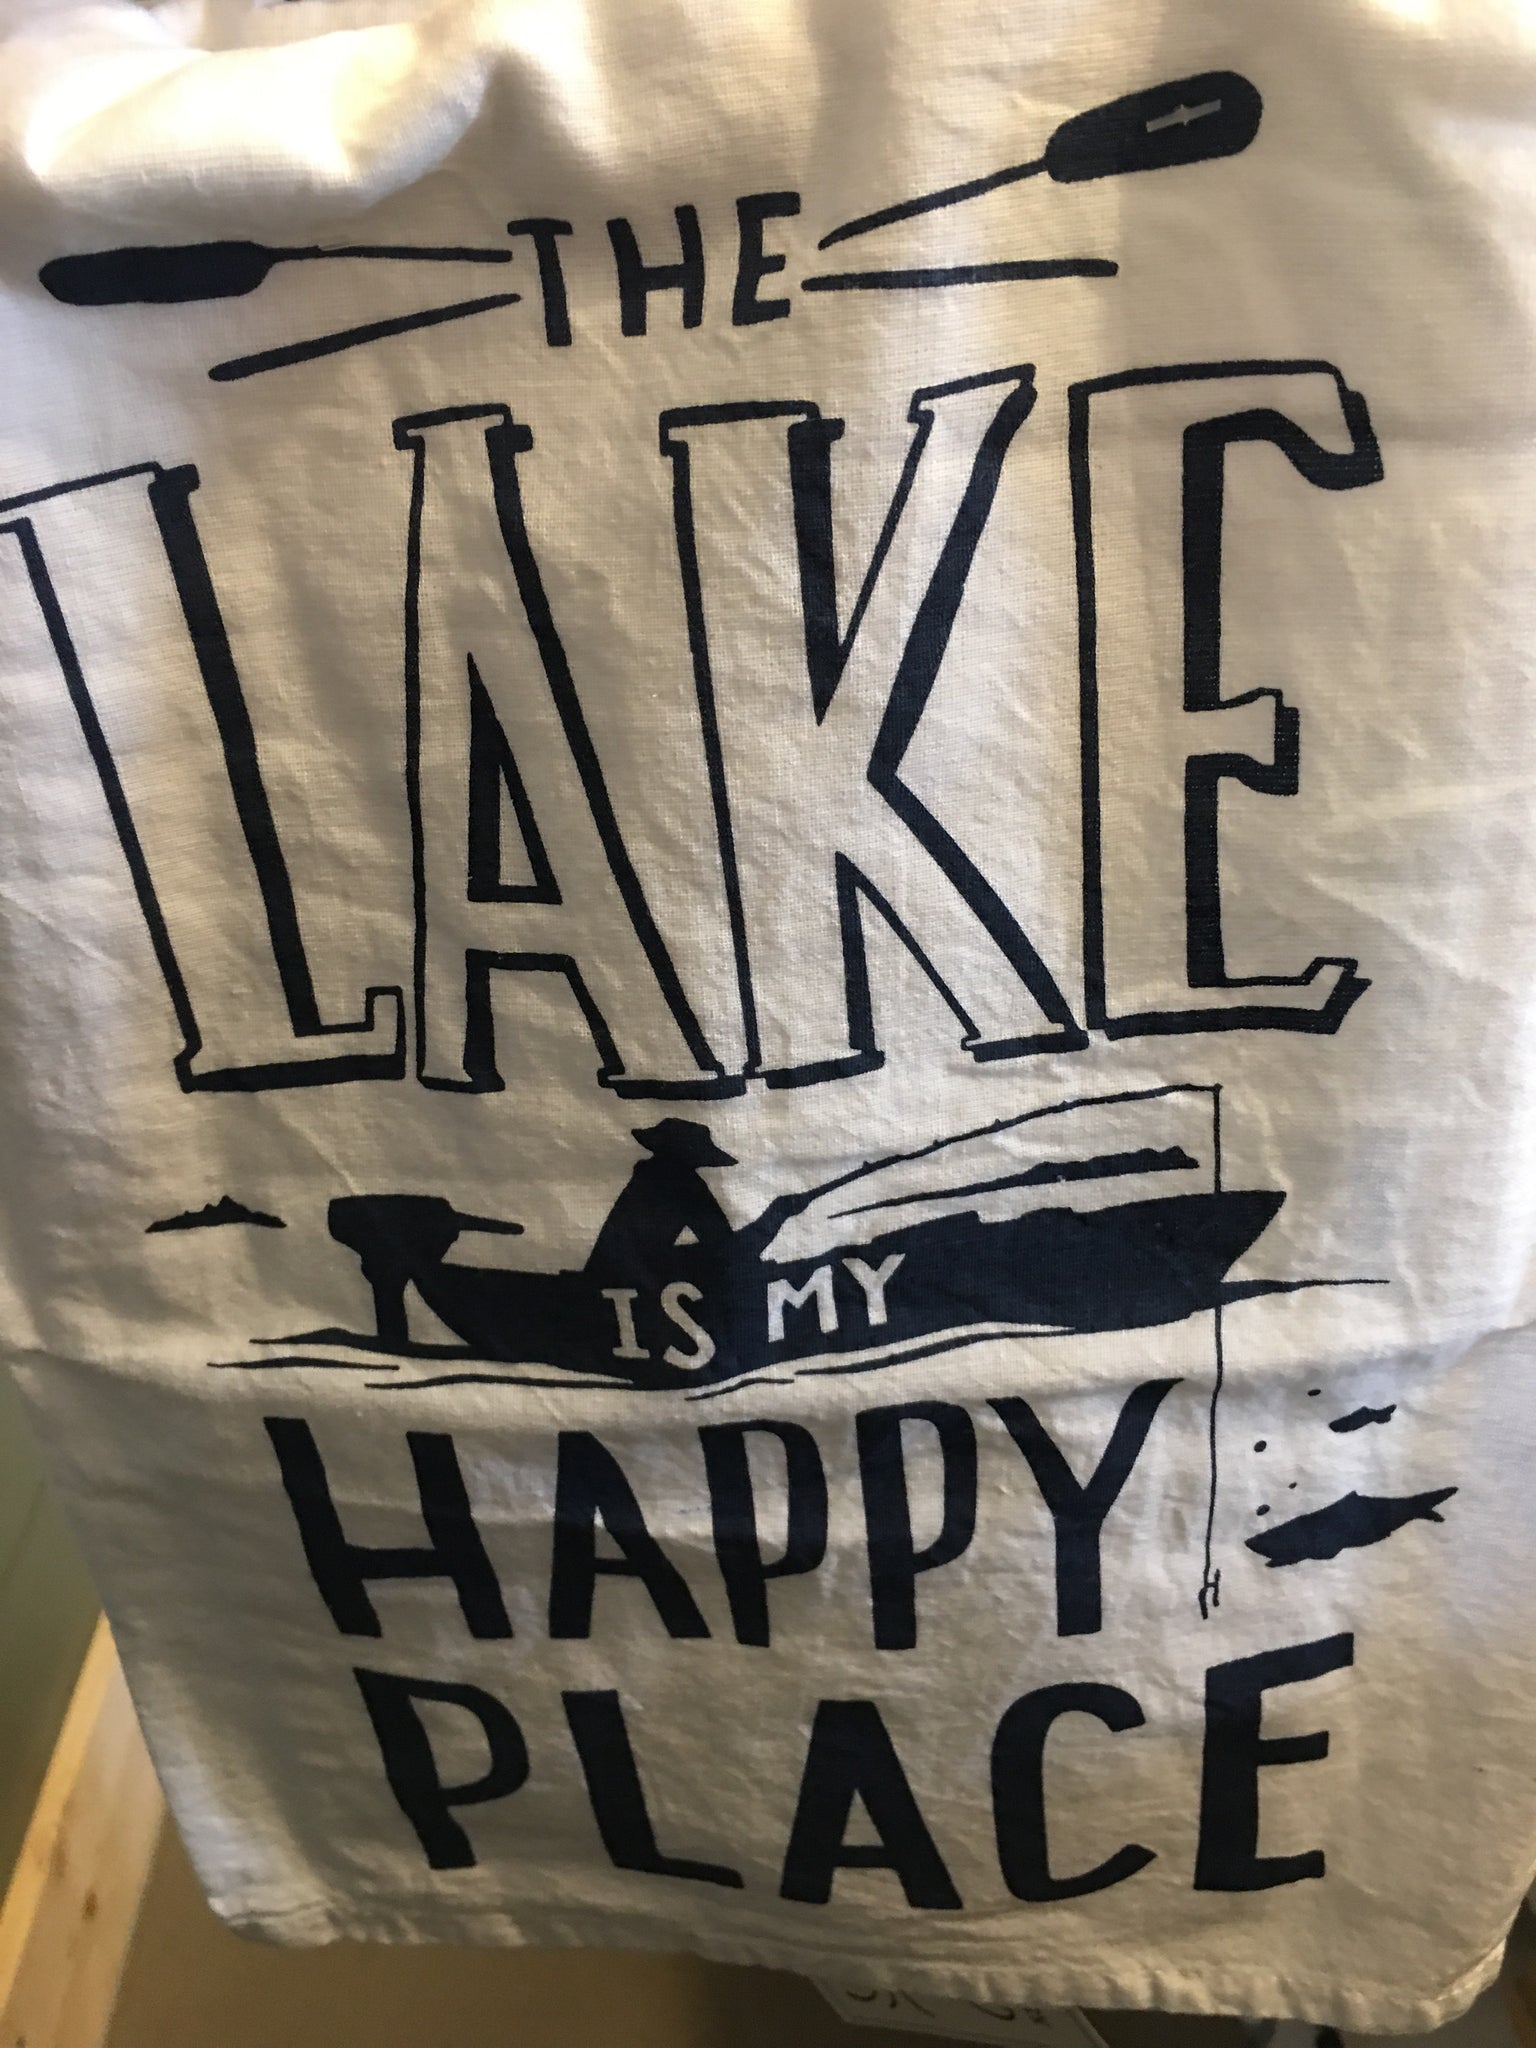 The lake is my happy place tea towel